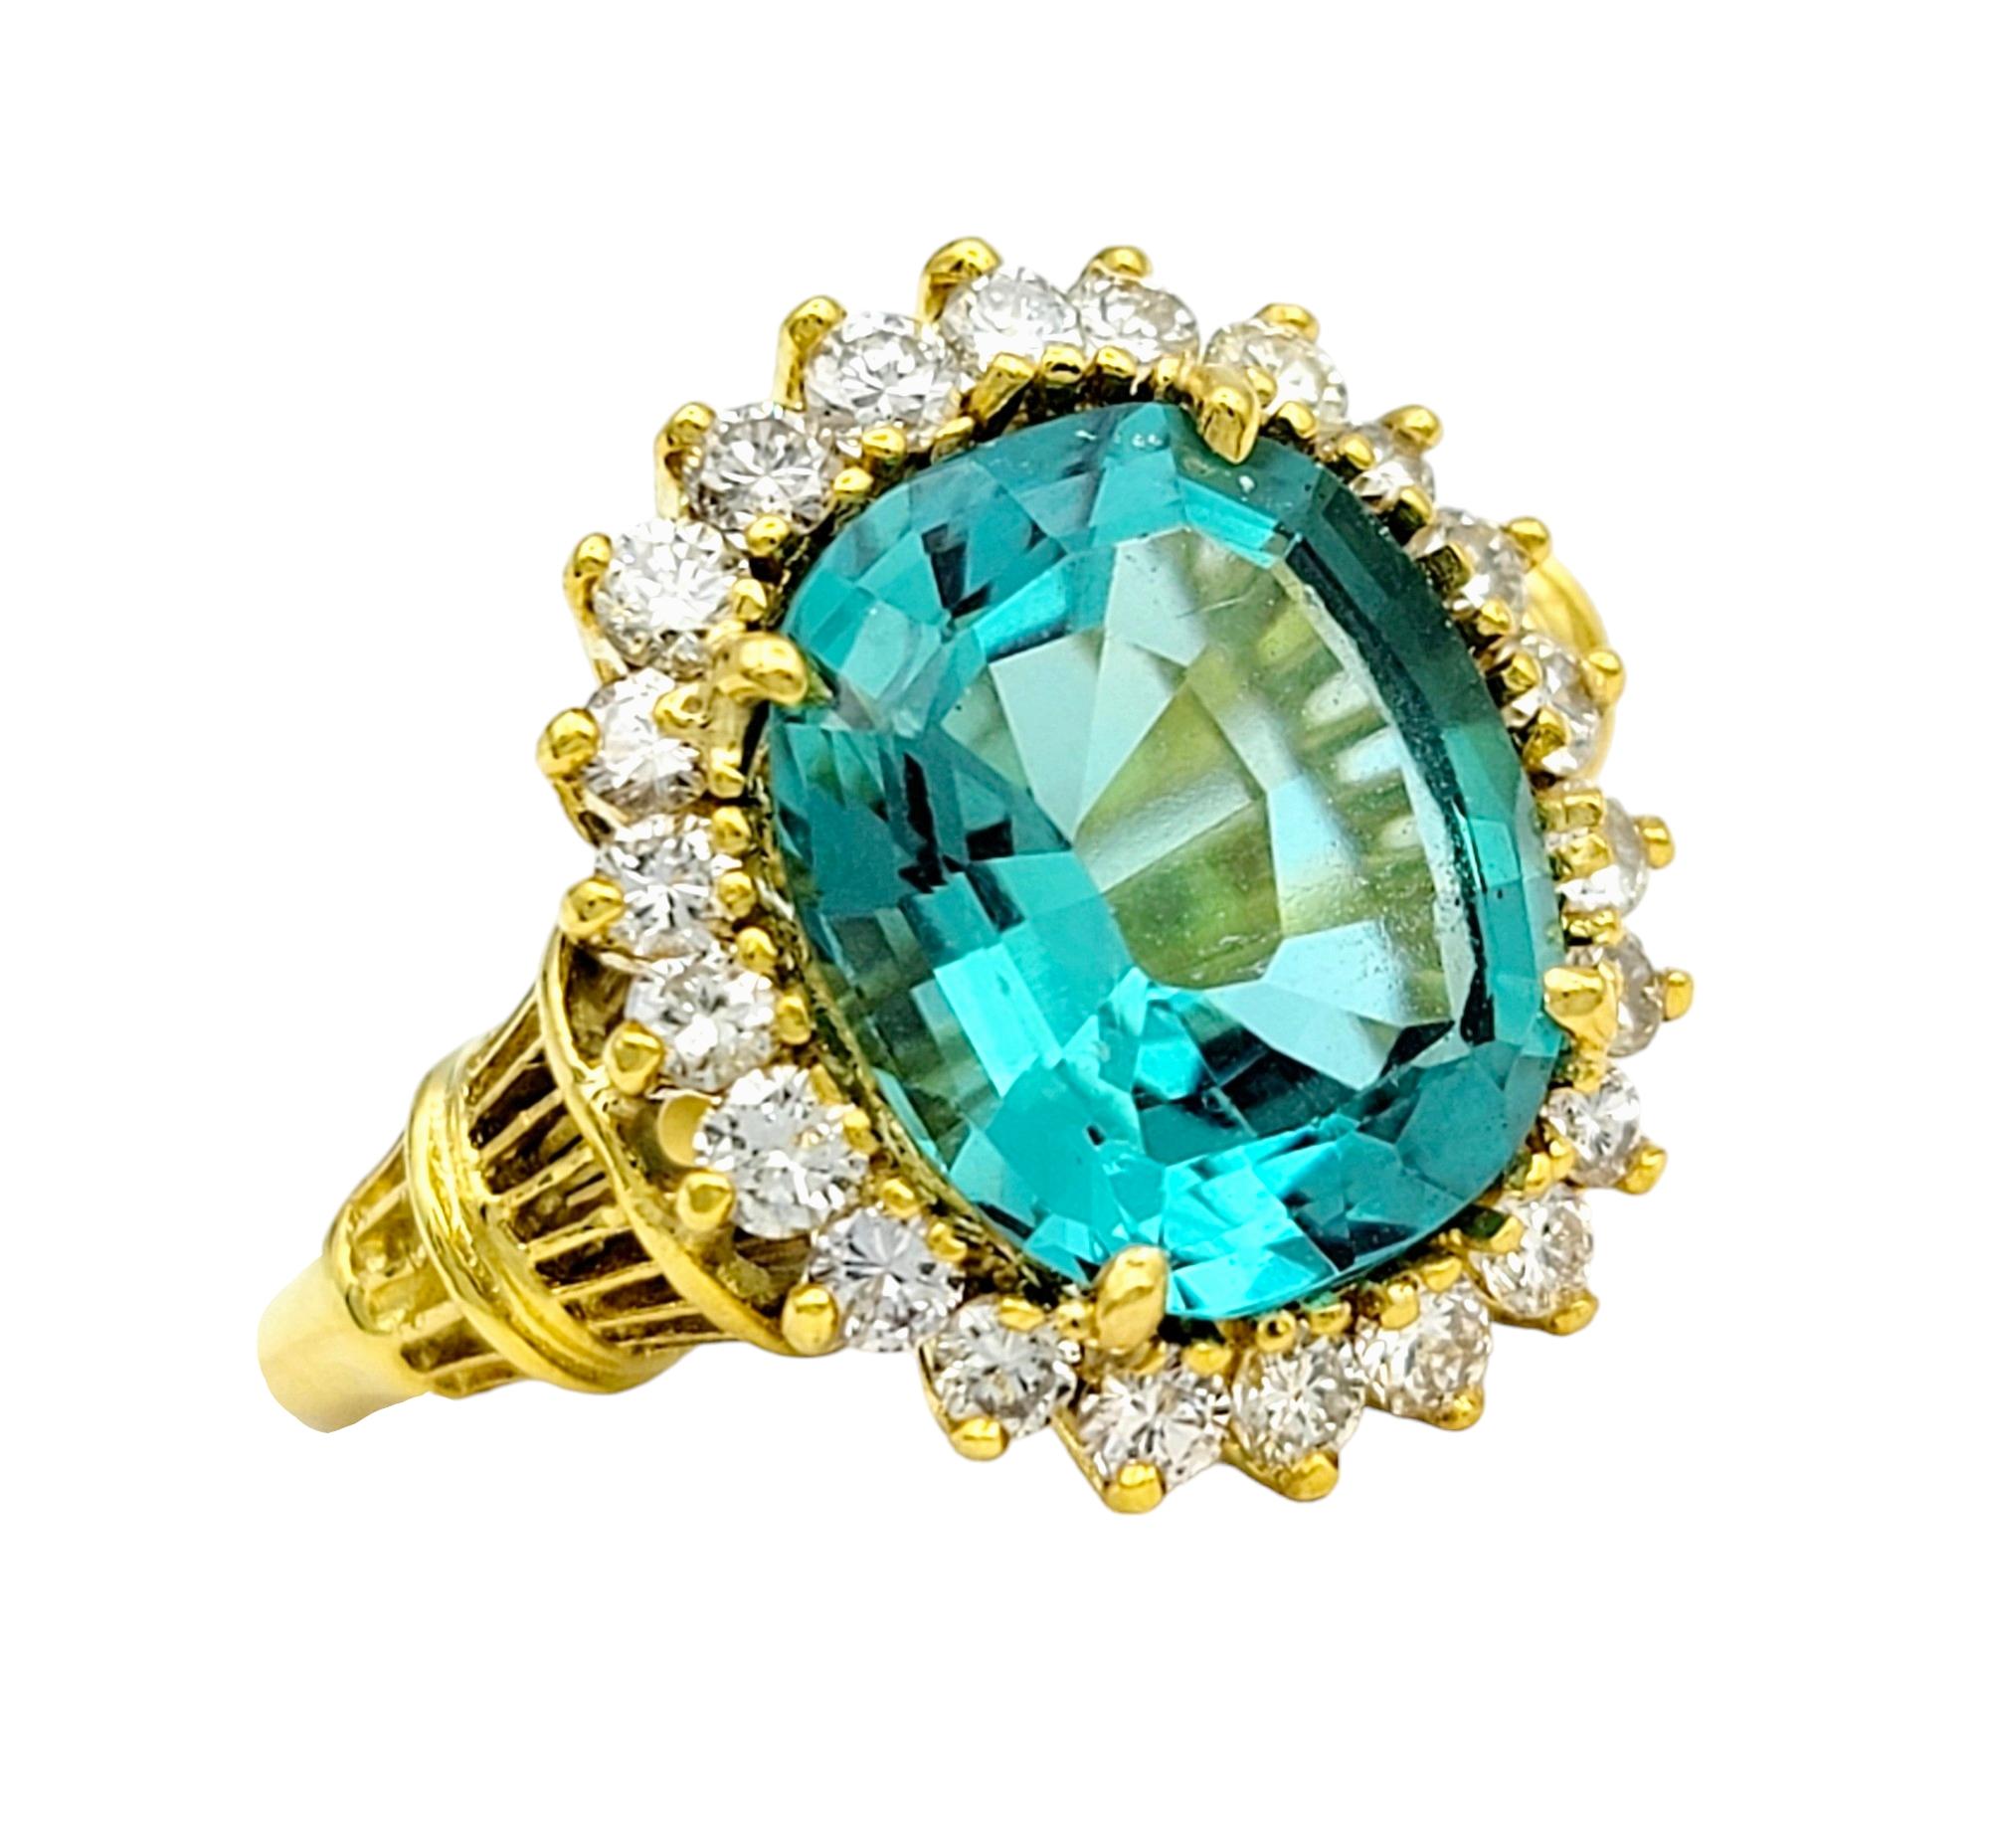 Ring size: 3.75

Elevate your fine jewelry collection with this exquisite 3.00 carat oval cut Indicolite tourmaline ring, a true testament to timeless elegance and sophistication. The rare, mesmerizing Indicolite tourmaline takes center stage, its